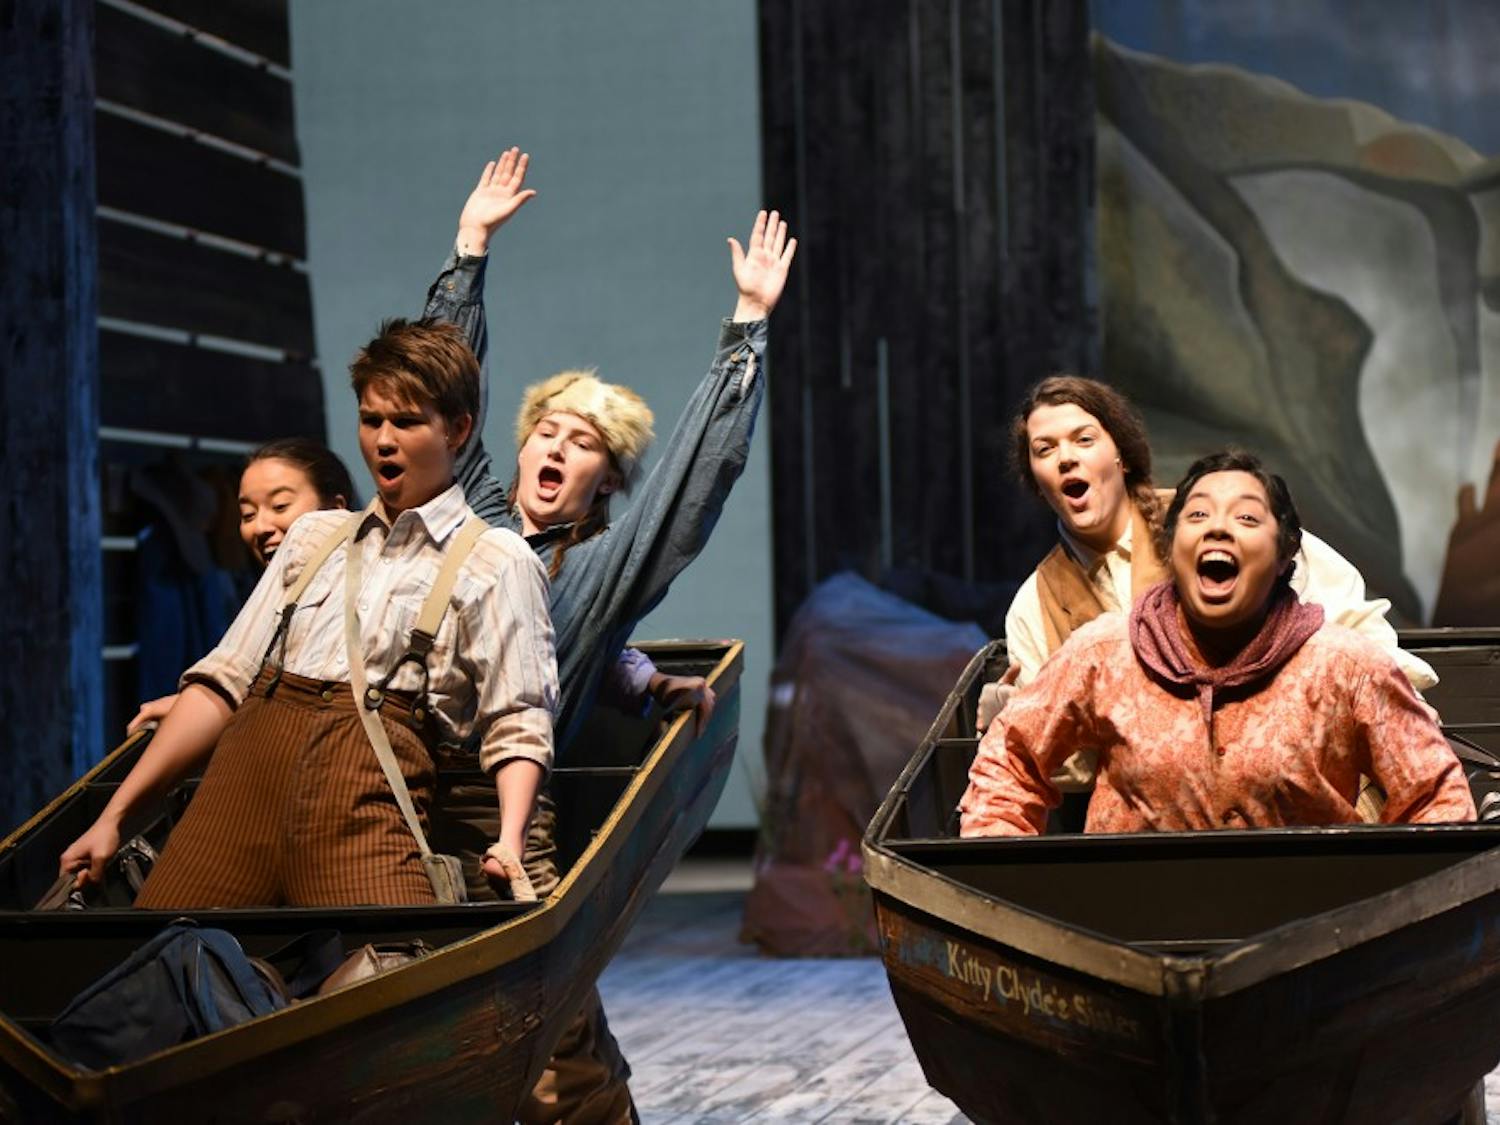 Actors perform&nbsp;"Men on Boats," which runs at the Paul V. Galvin Playhouse through April 2, 2017.